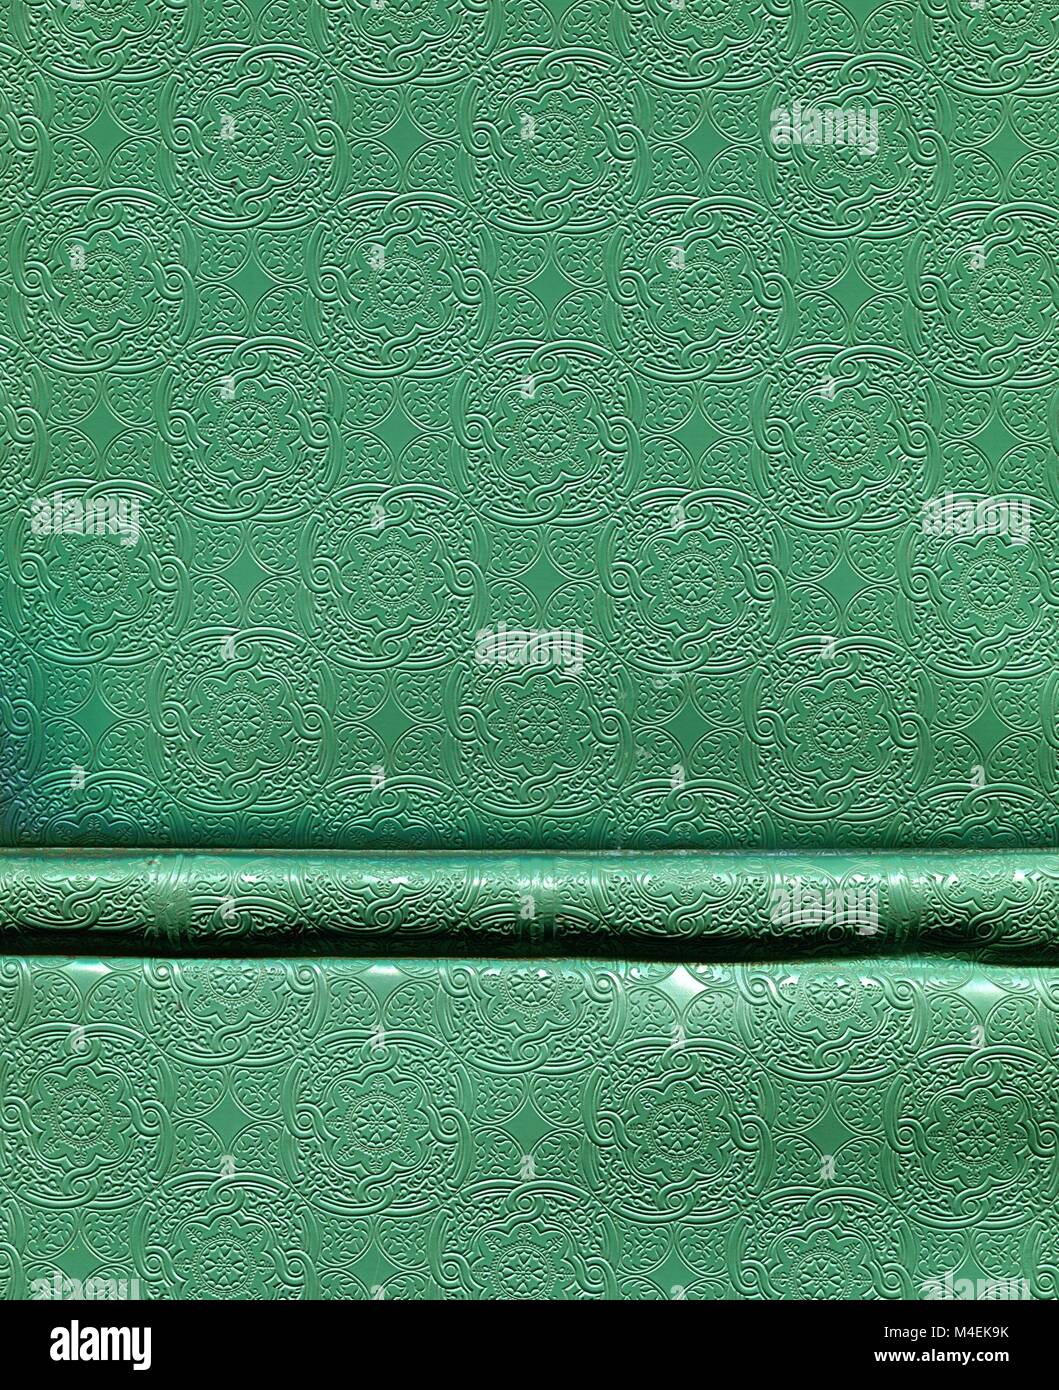 green book cover with embossed motifs Stock Photo